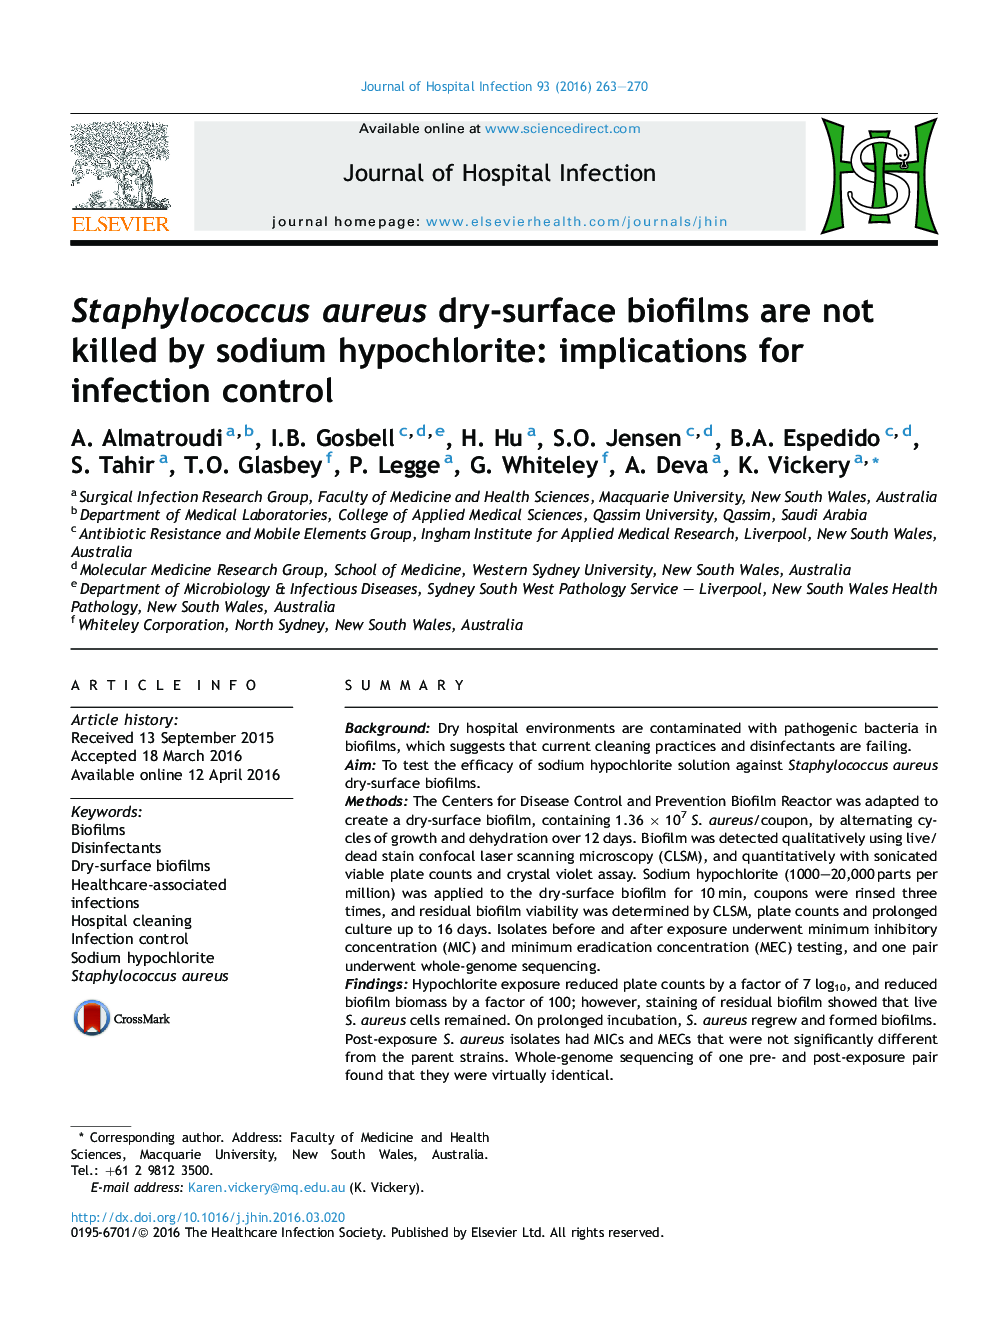 Staphylococcus aureus dry-surface biofilms are not killed by sodium hypochlorite: implications for infection control